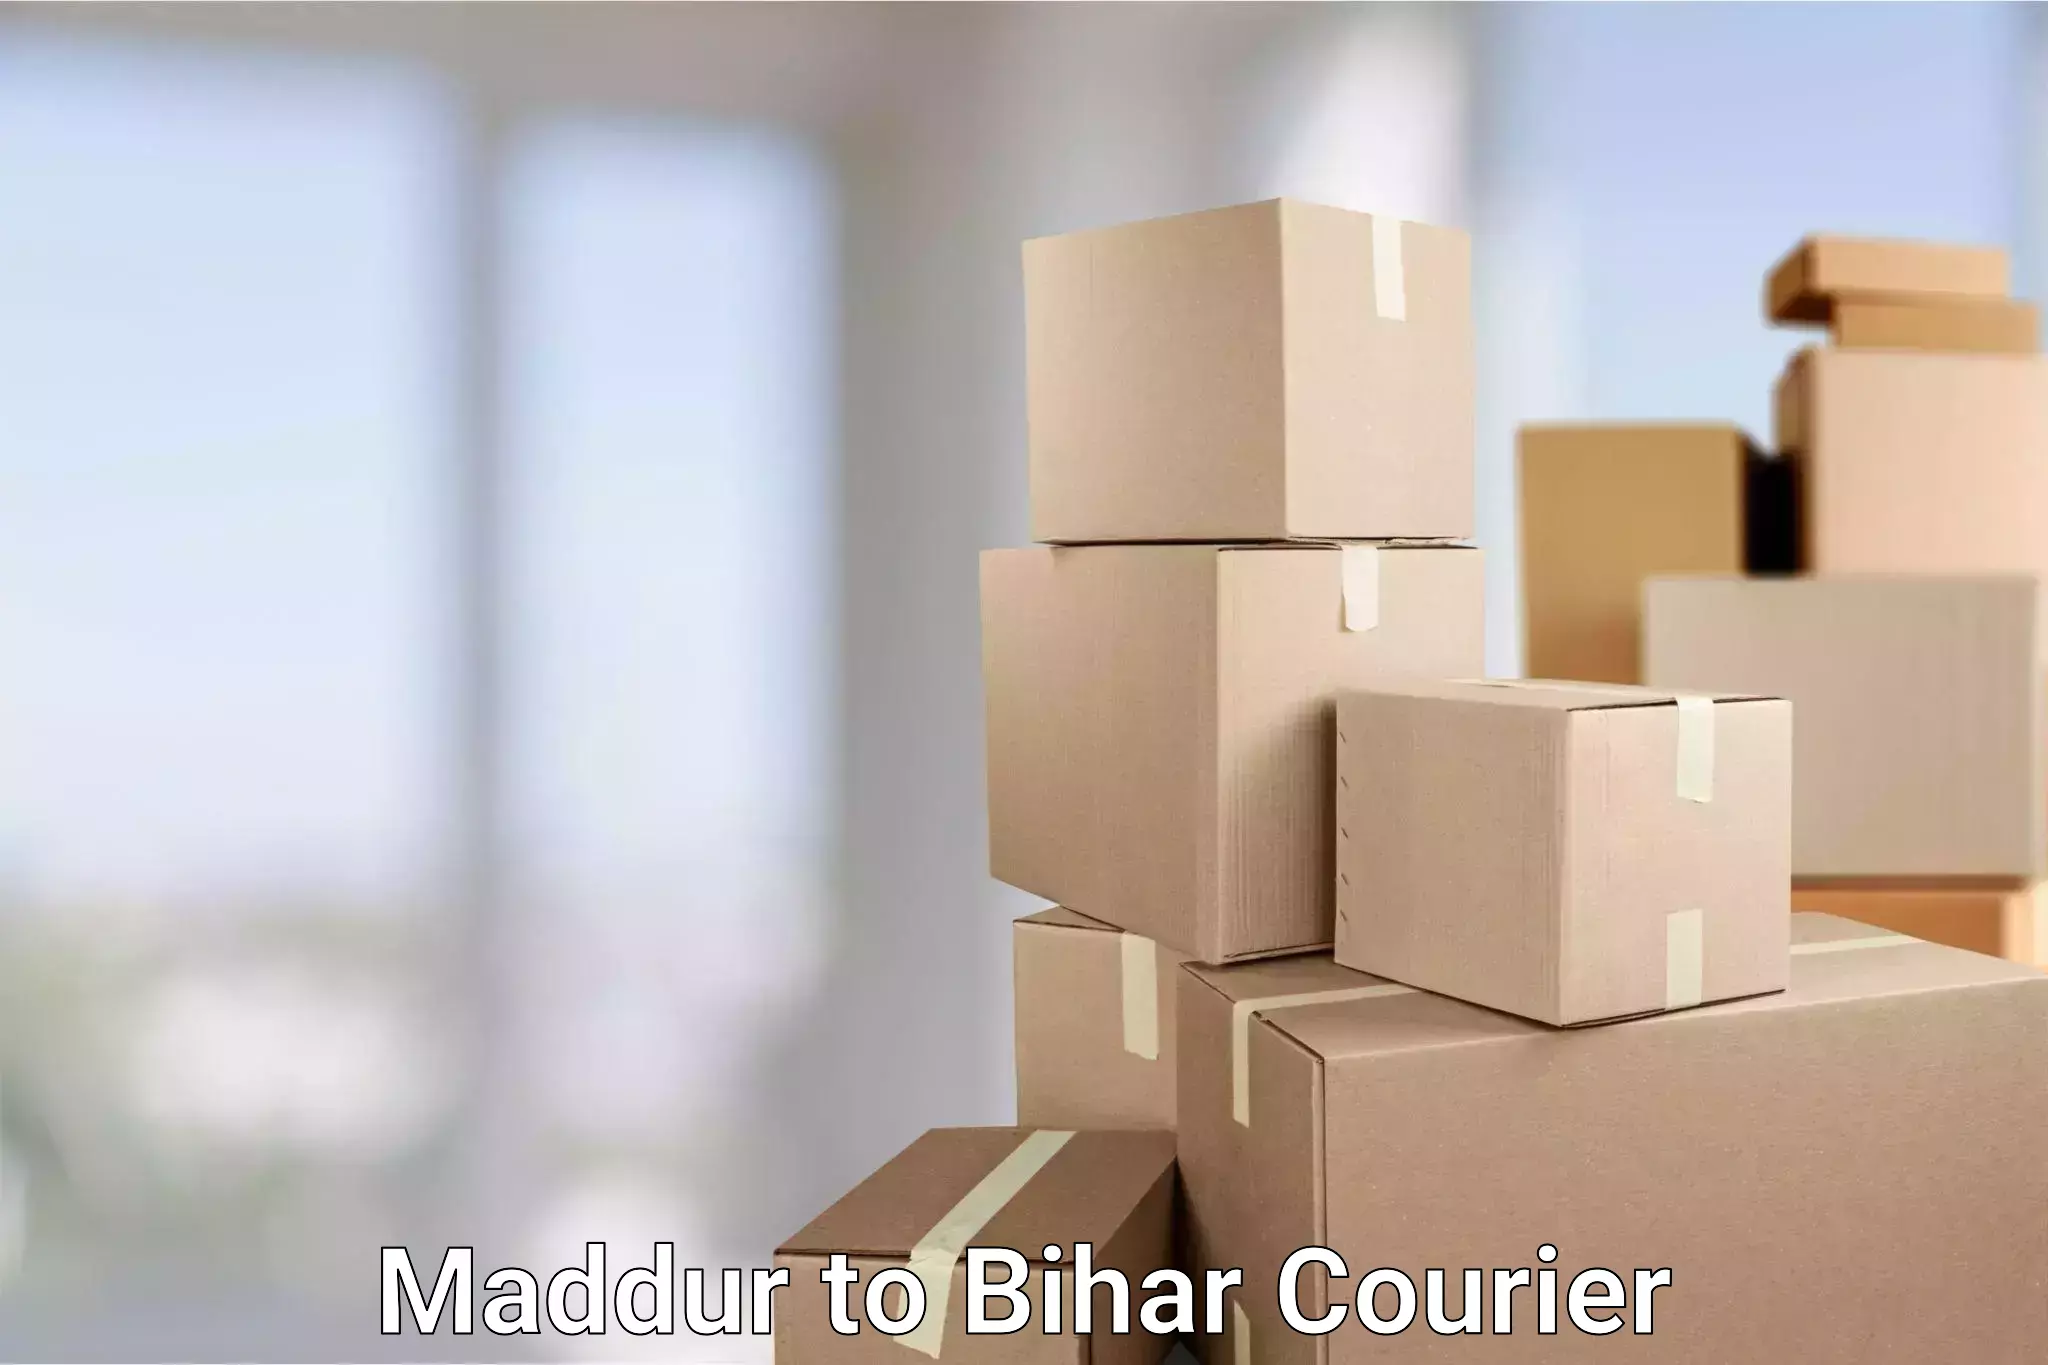 24-hour courier services in Maddur to Motipur